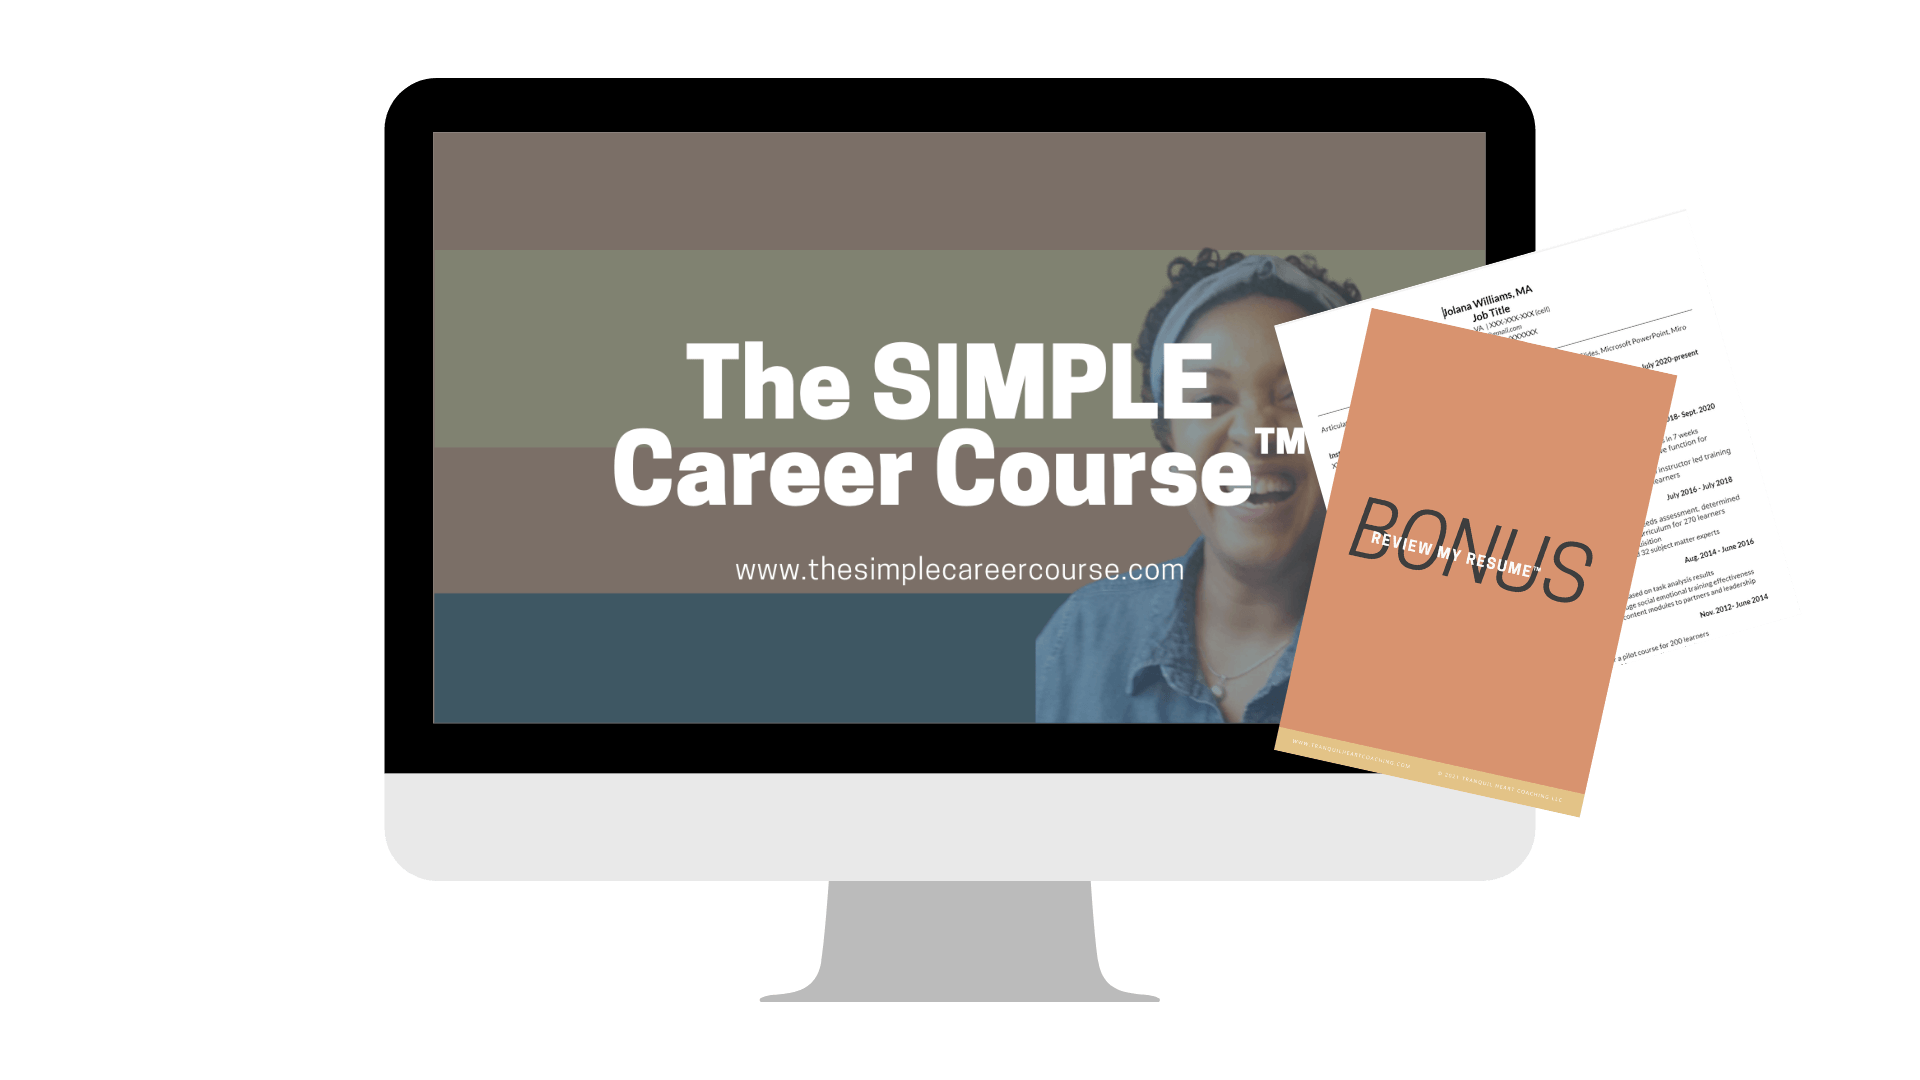 Bonus stack for The SIMPLE Career Course™